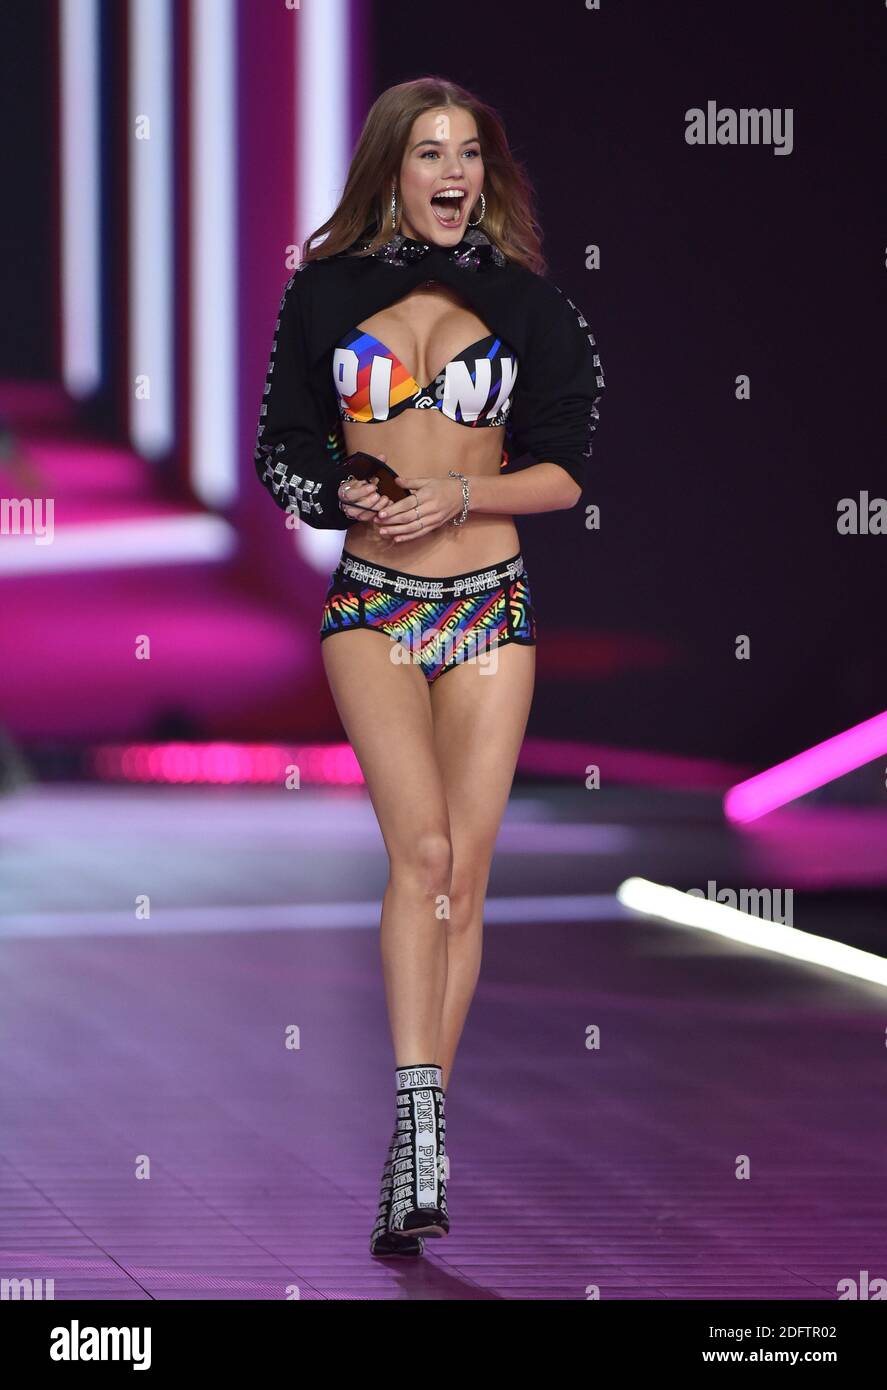 Barbara Palvin walks the runway at the 2018 Victoria's Secret Fashion Show  at Pier 94 on November 8, 2018 in New York City. Photo by Lionel  Hahn/ABACAPRESS.COM Stock Photo - Alamy